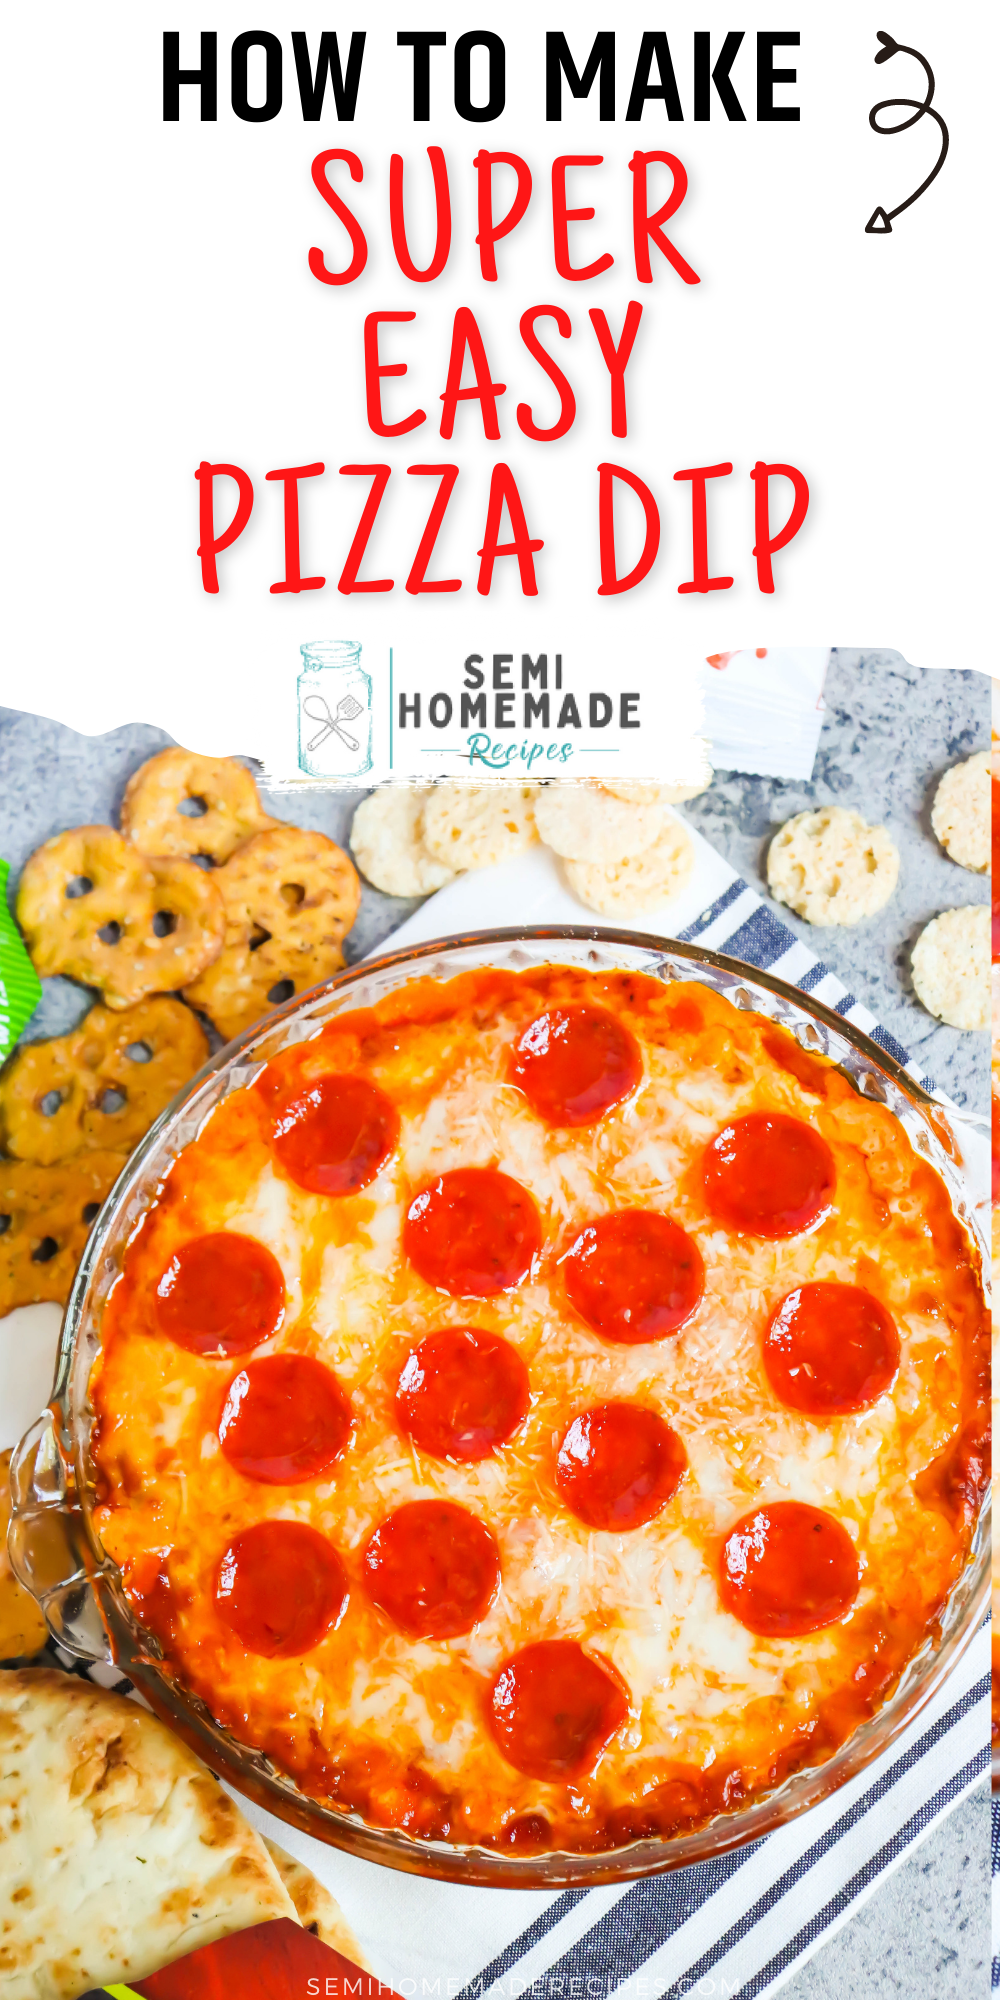 Pizza Dip – layers of cream cheese, parmesan cheese, mozzarella cheese and pizza sauce are topped with more cheese and pepperoni to make this easy pizza party dip! Perfect for serving with pretzels, naan bread, or crispy cheese wisps.

